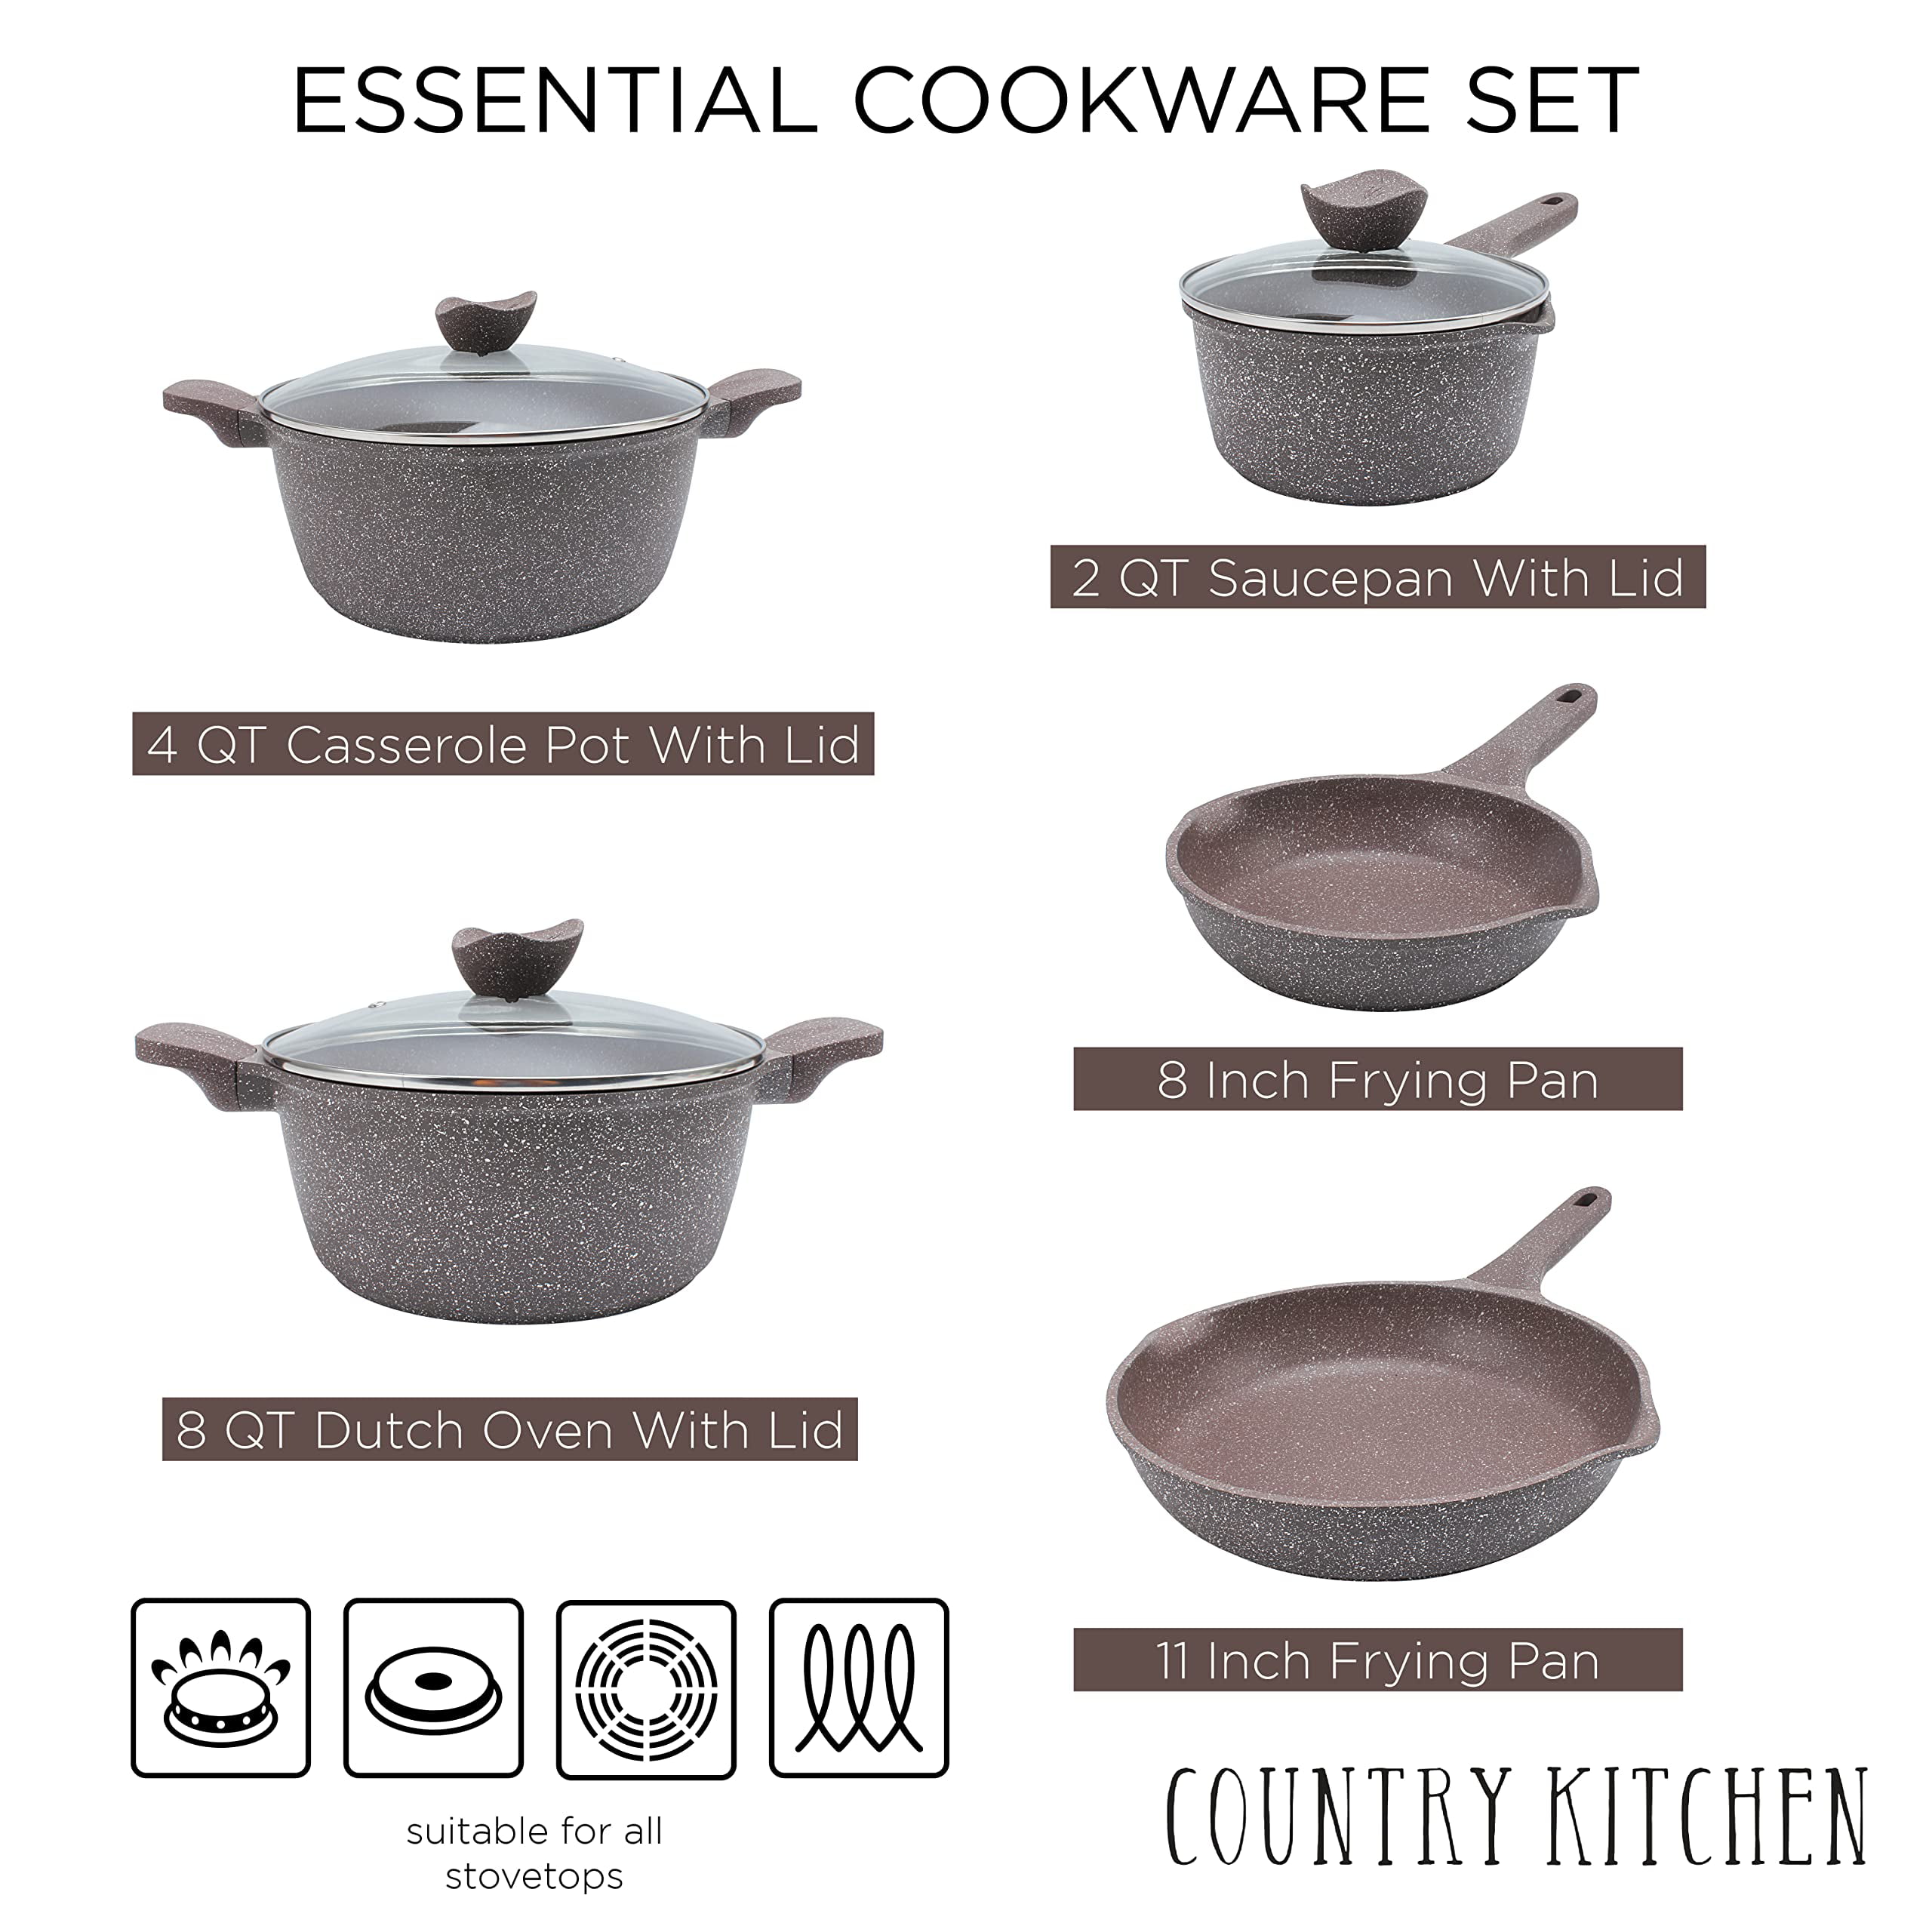 Country Kitchen country kitchen induction cookware sets - 13 piece nonstick  cast aluminum pots and pans with bakelite handles, glass lids (na